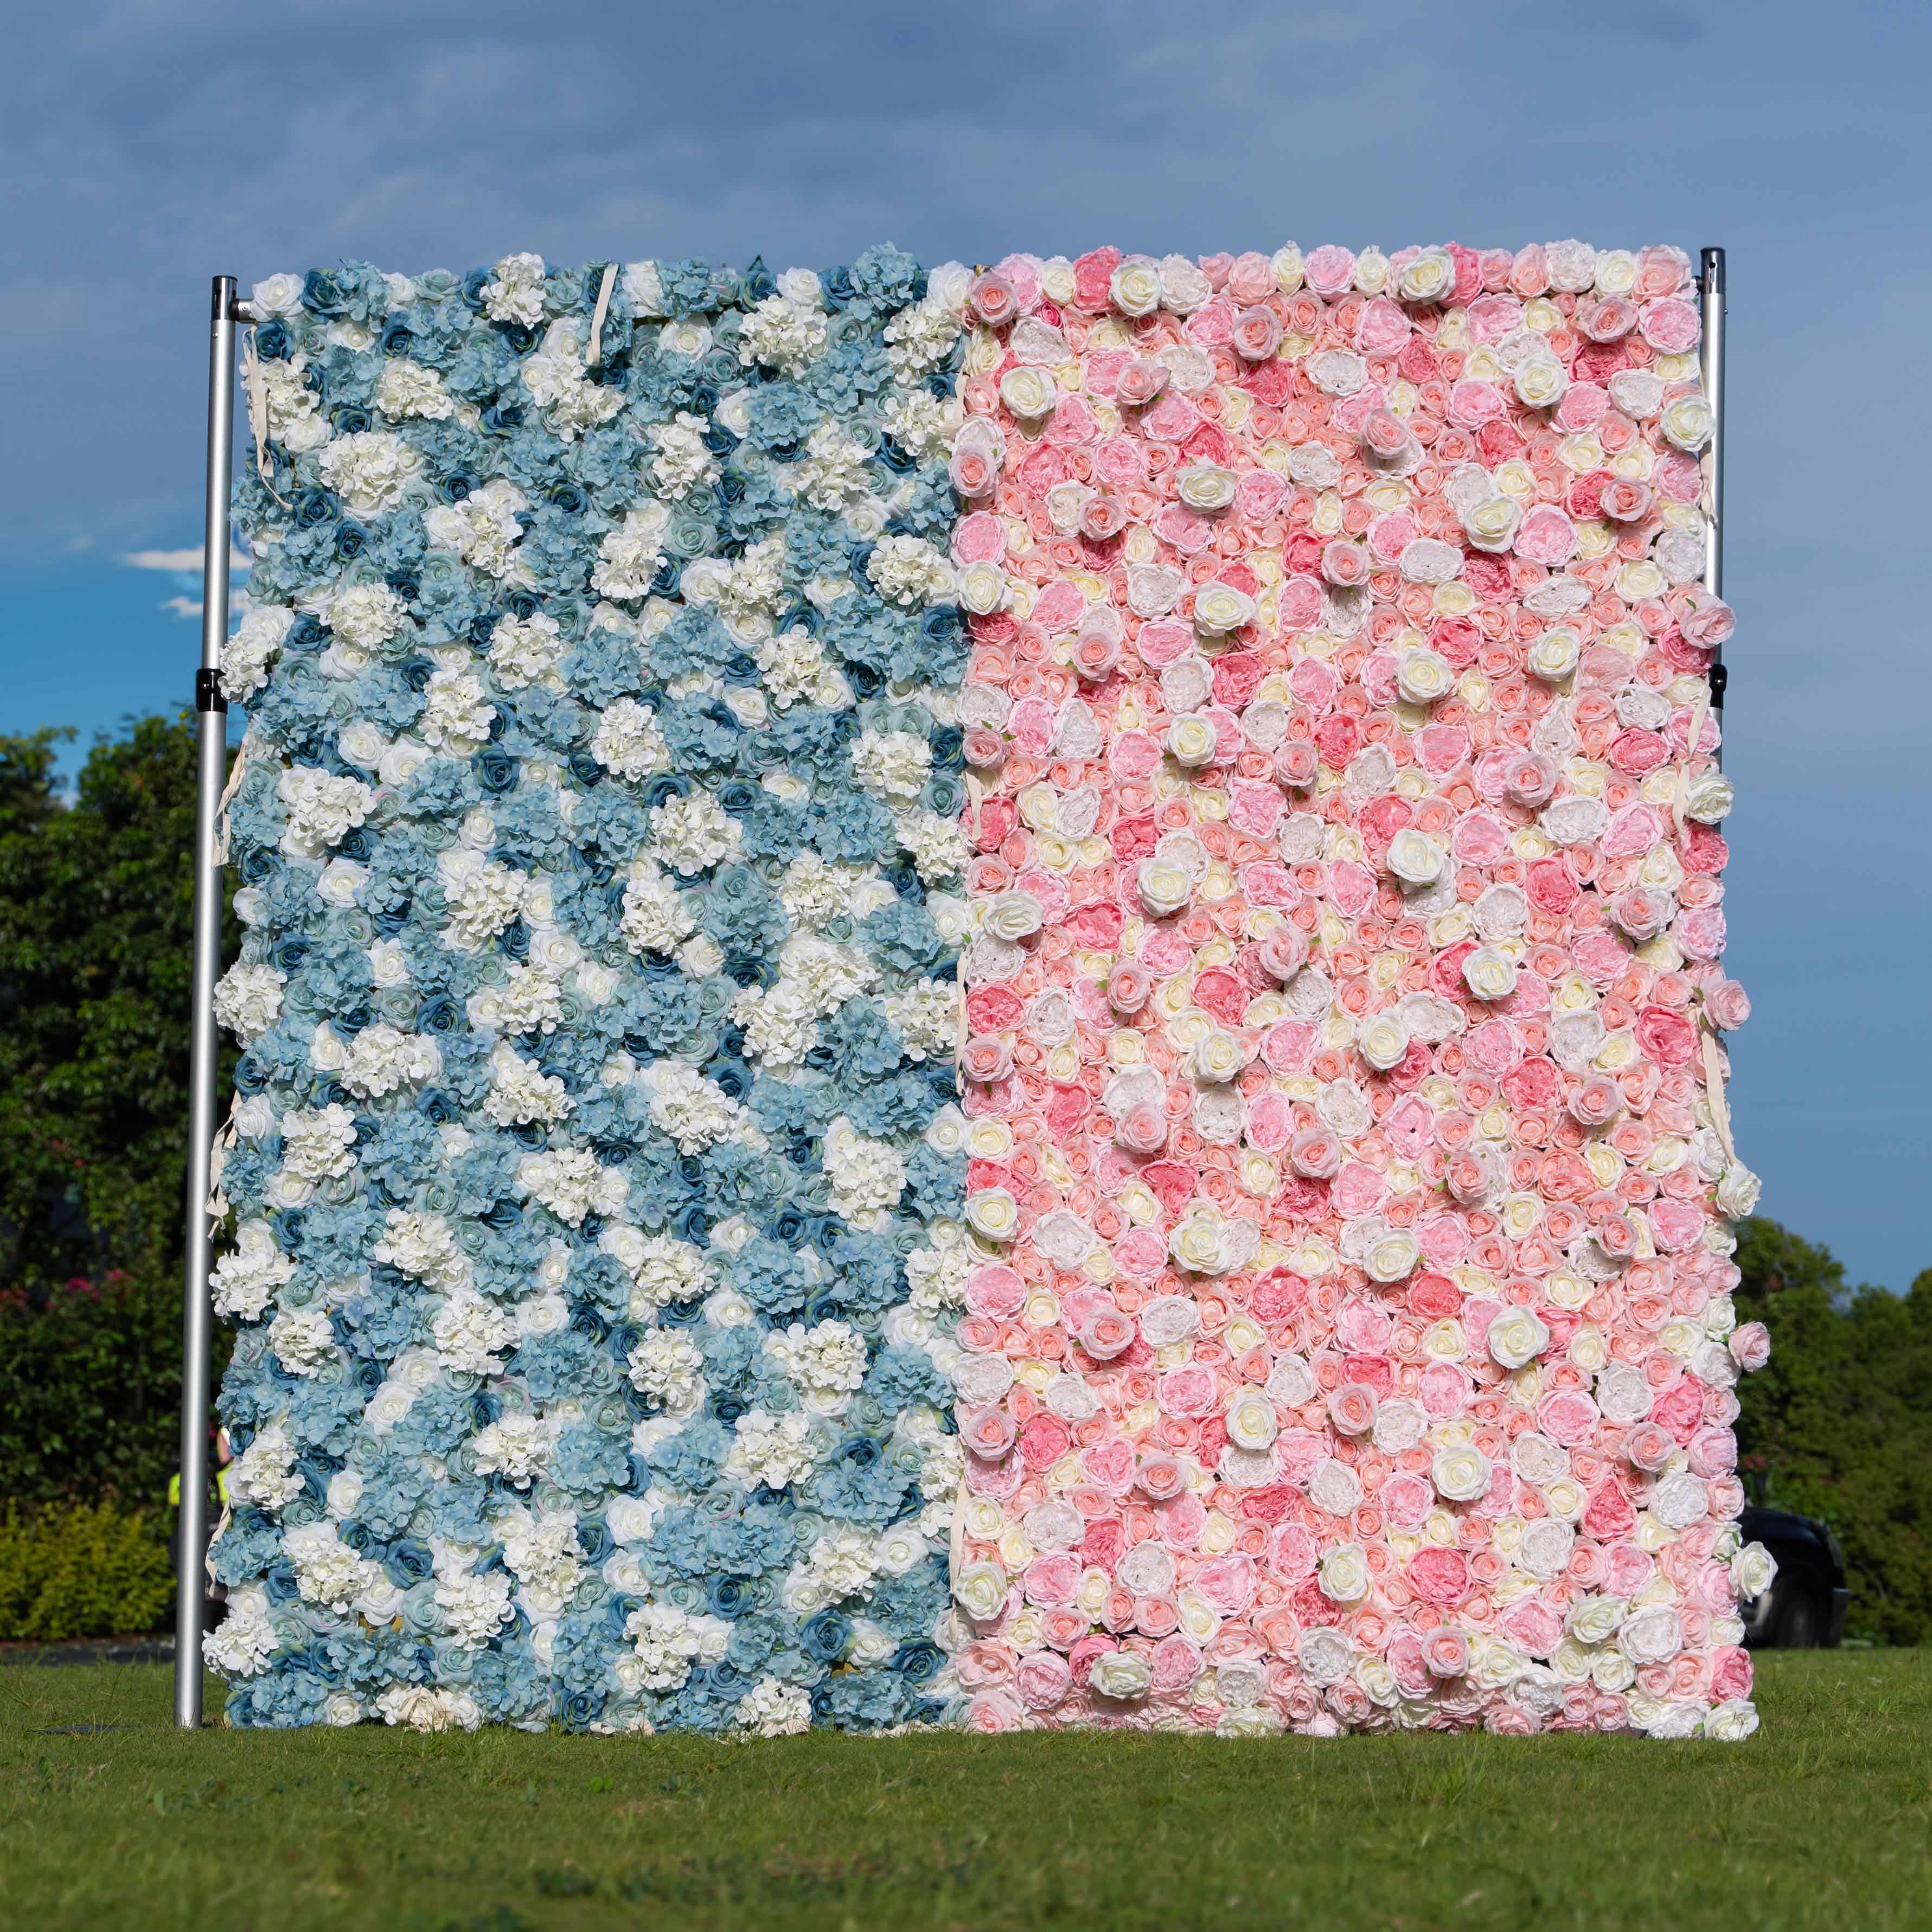 Baby Shower & Gender Reveal Party Flower Wall Backdrop - Blue & Pink Roll-Up Fabric Flower Decorations -Celebration Decor